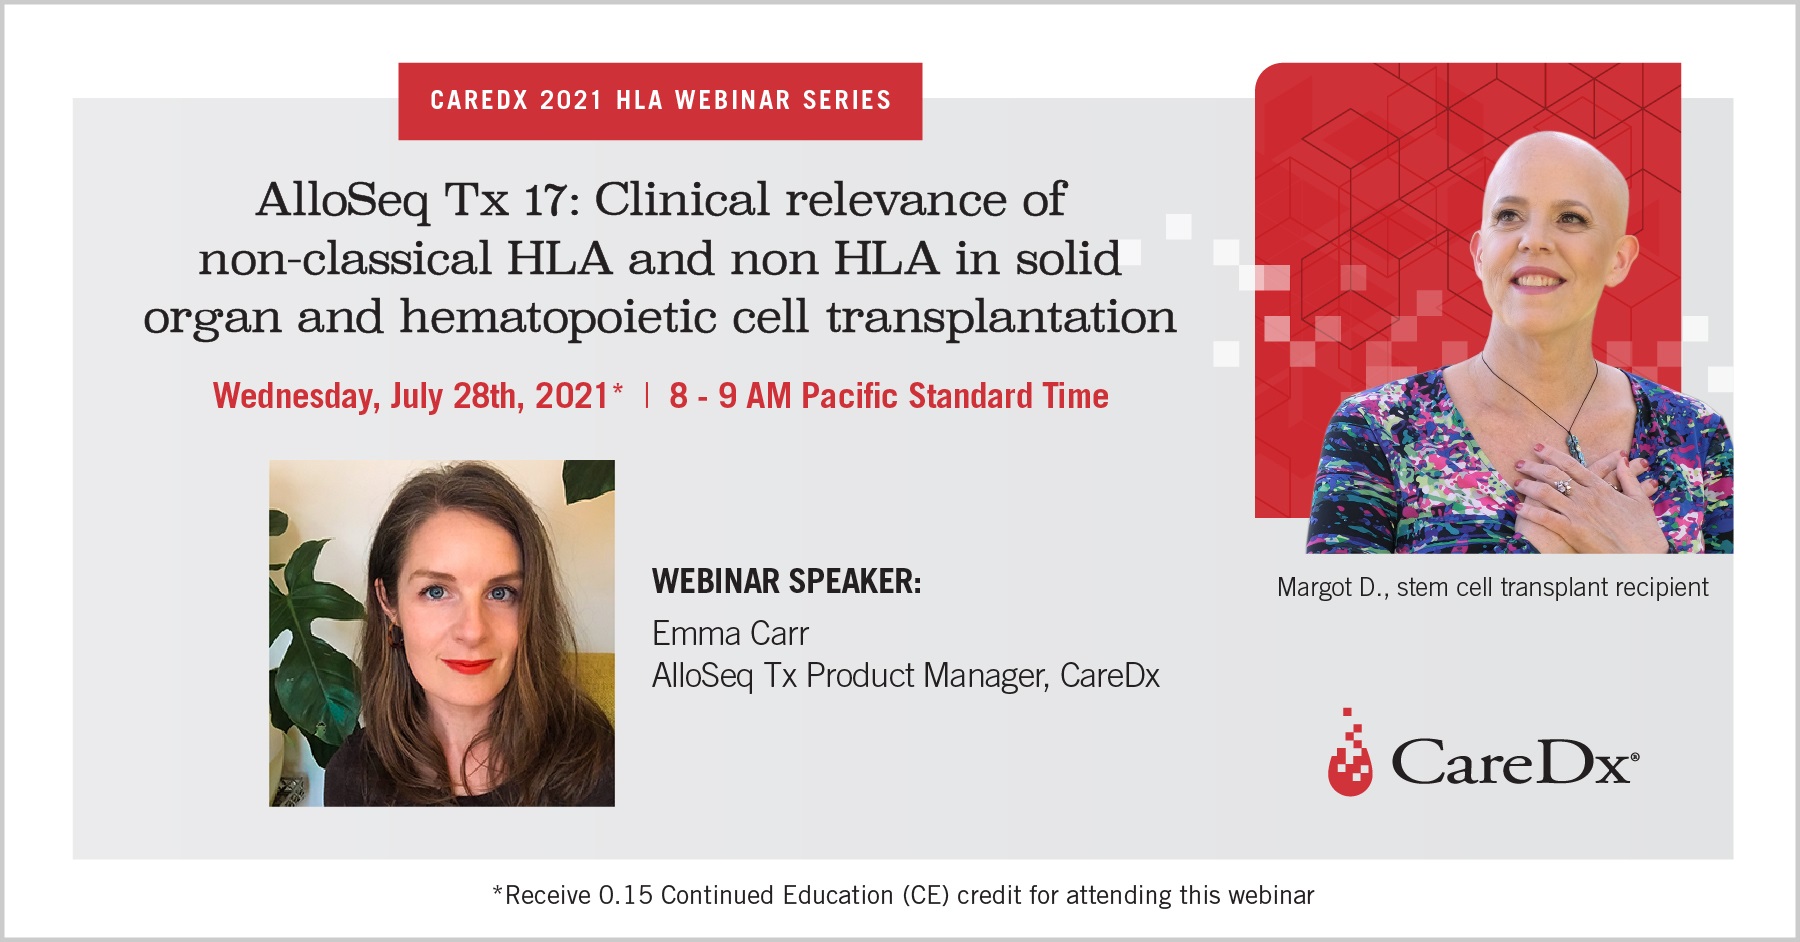 2021 HLA Webinar Series #5: AlloSeq Tx 17: Clinical relevance of non-classical HLA and non HLA in solid organ and hematopoietic cell transplantation